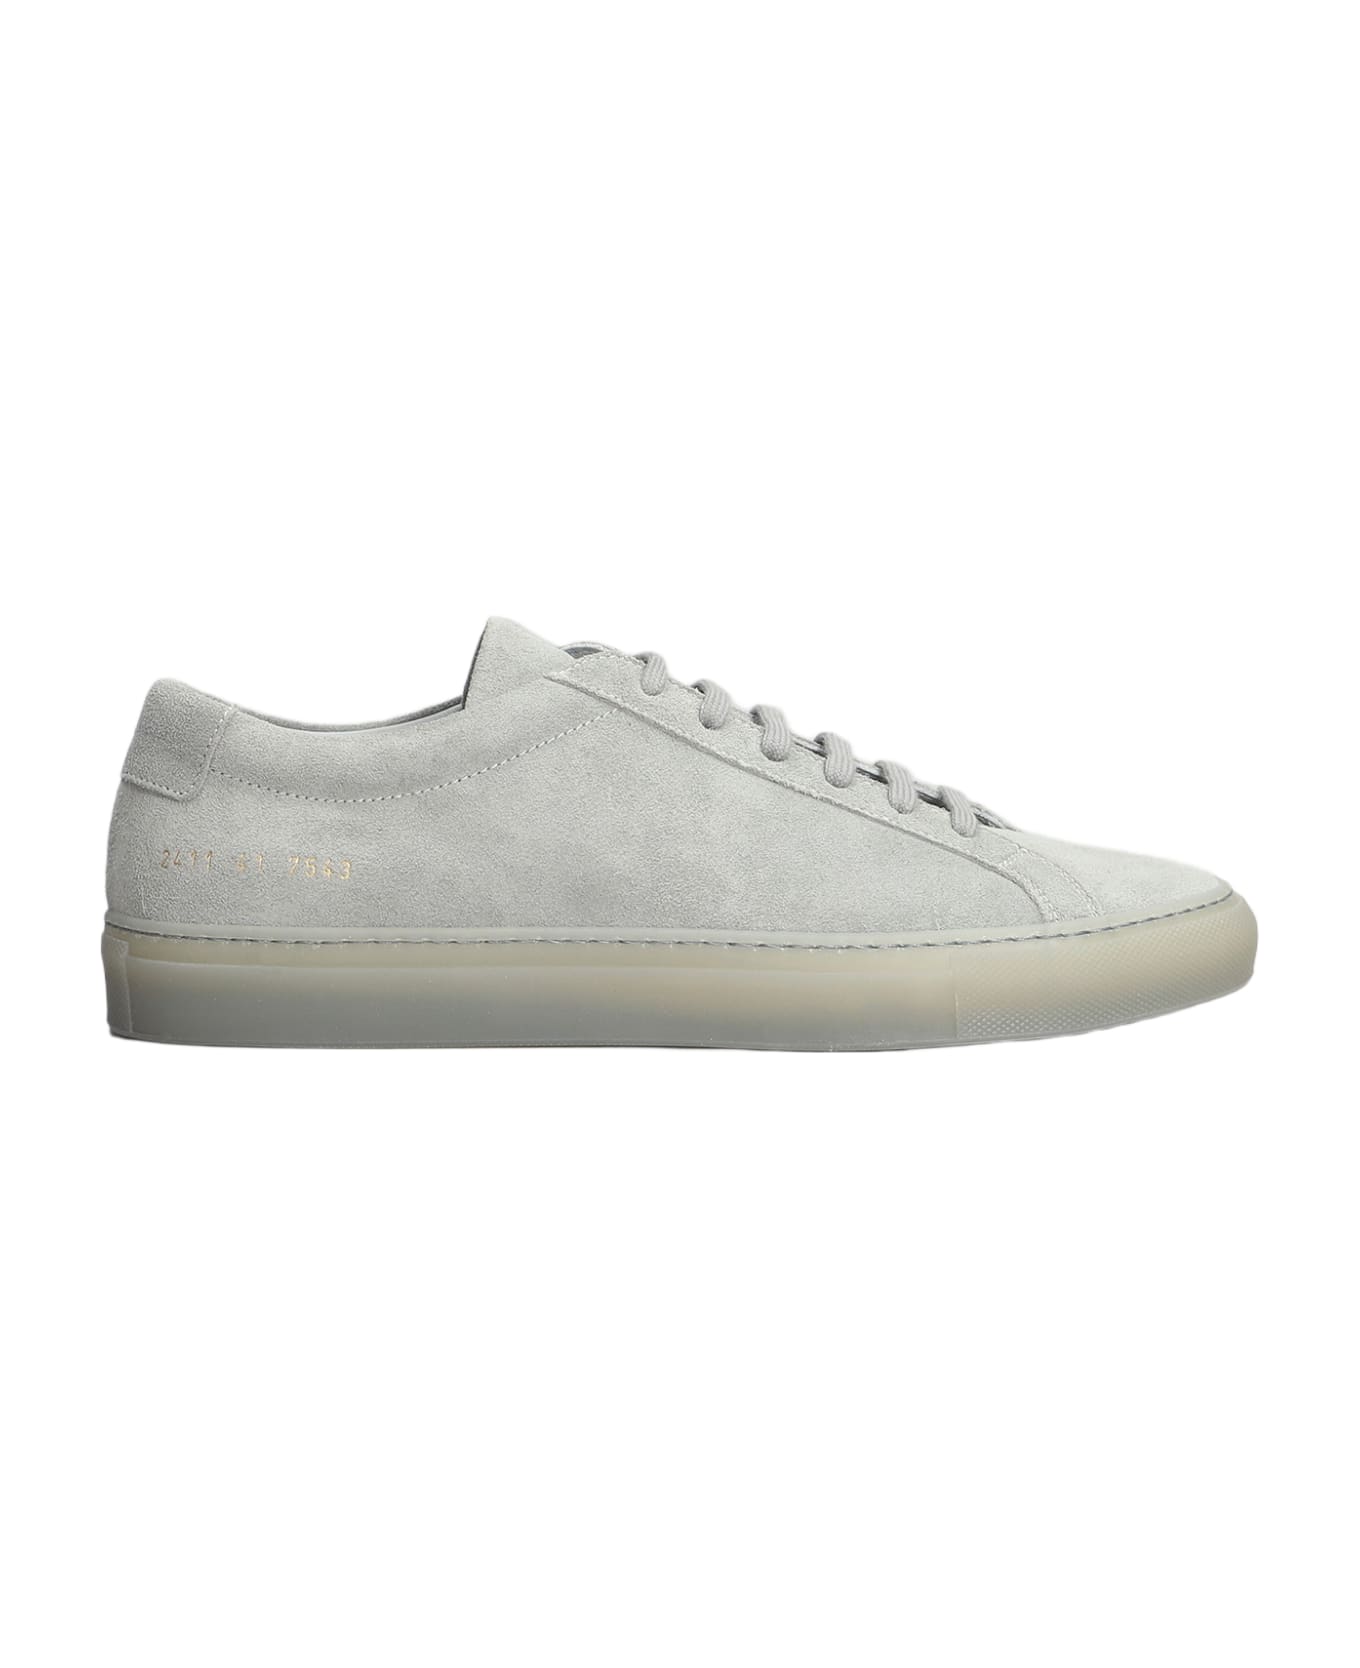 Common Projects Original Achilles Sneakers - grey スニーカー